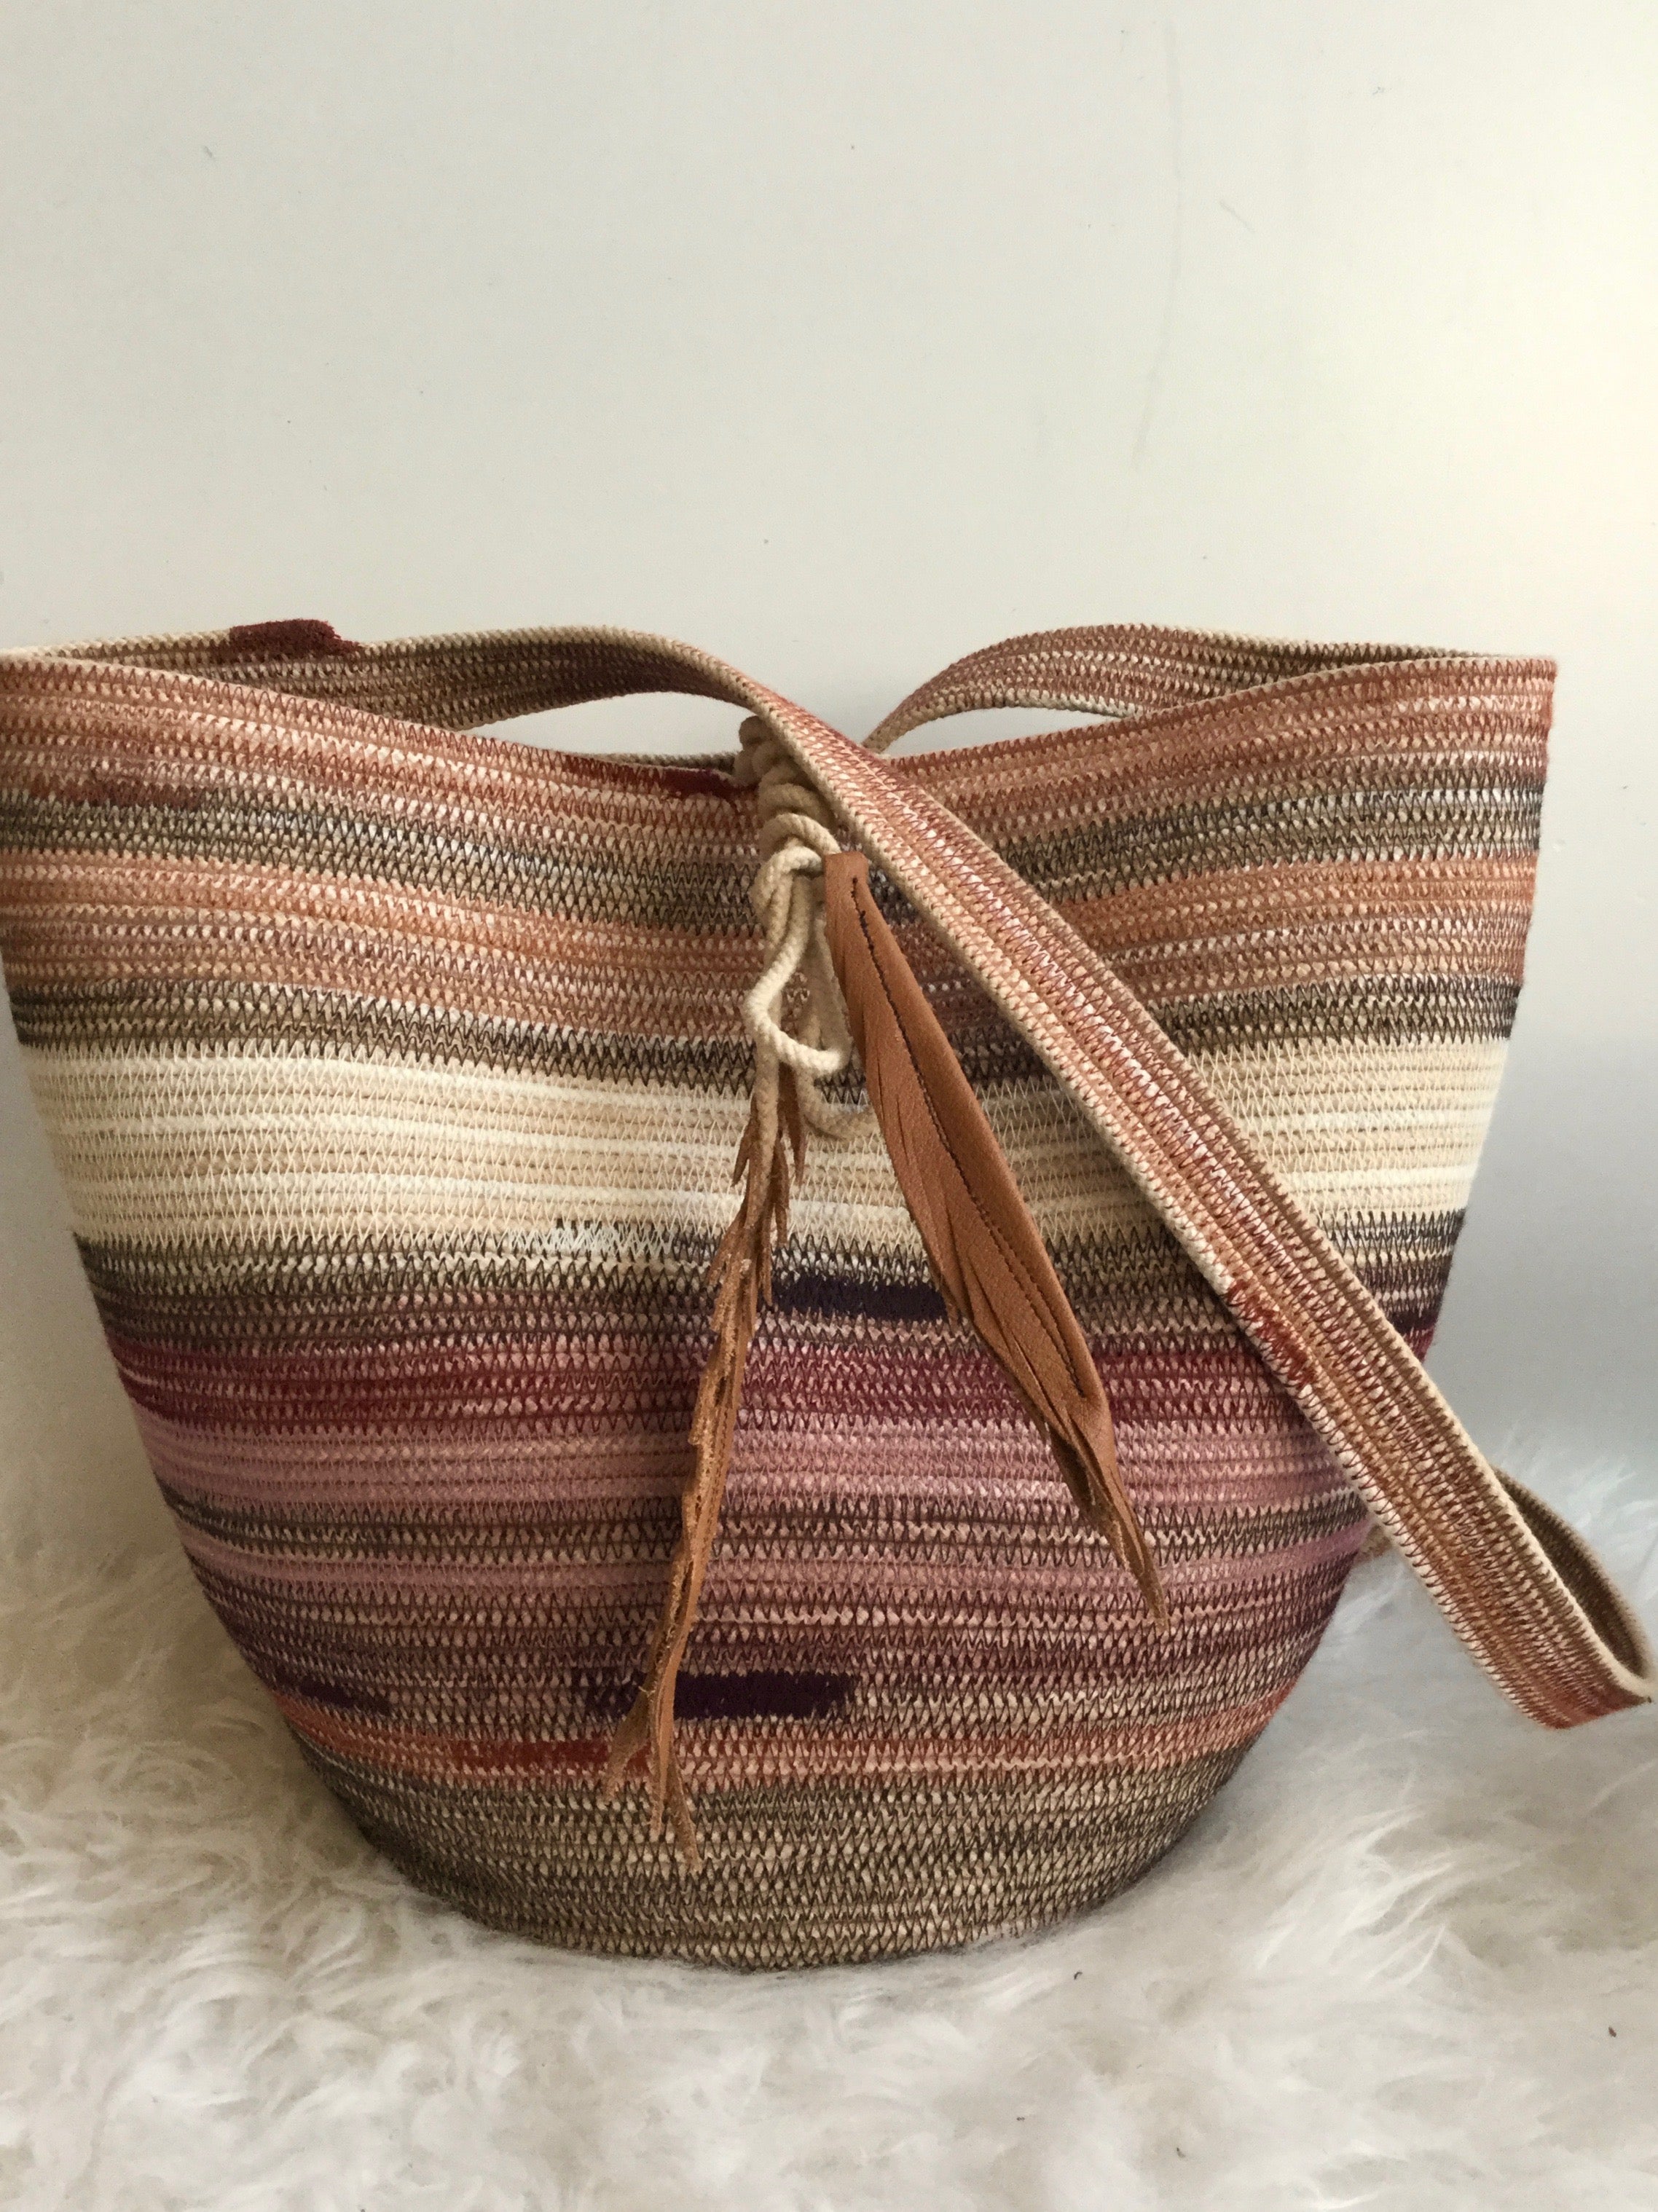 foraging basket made from cotton rope